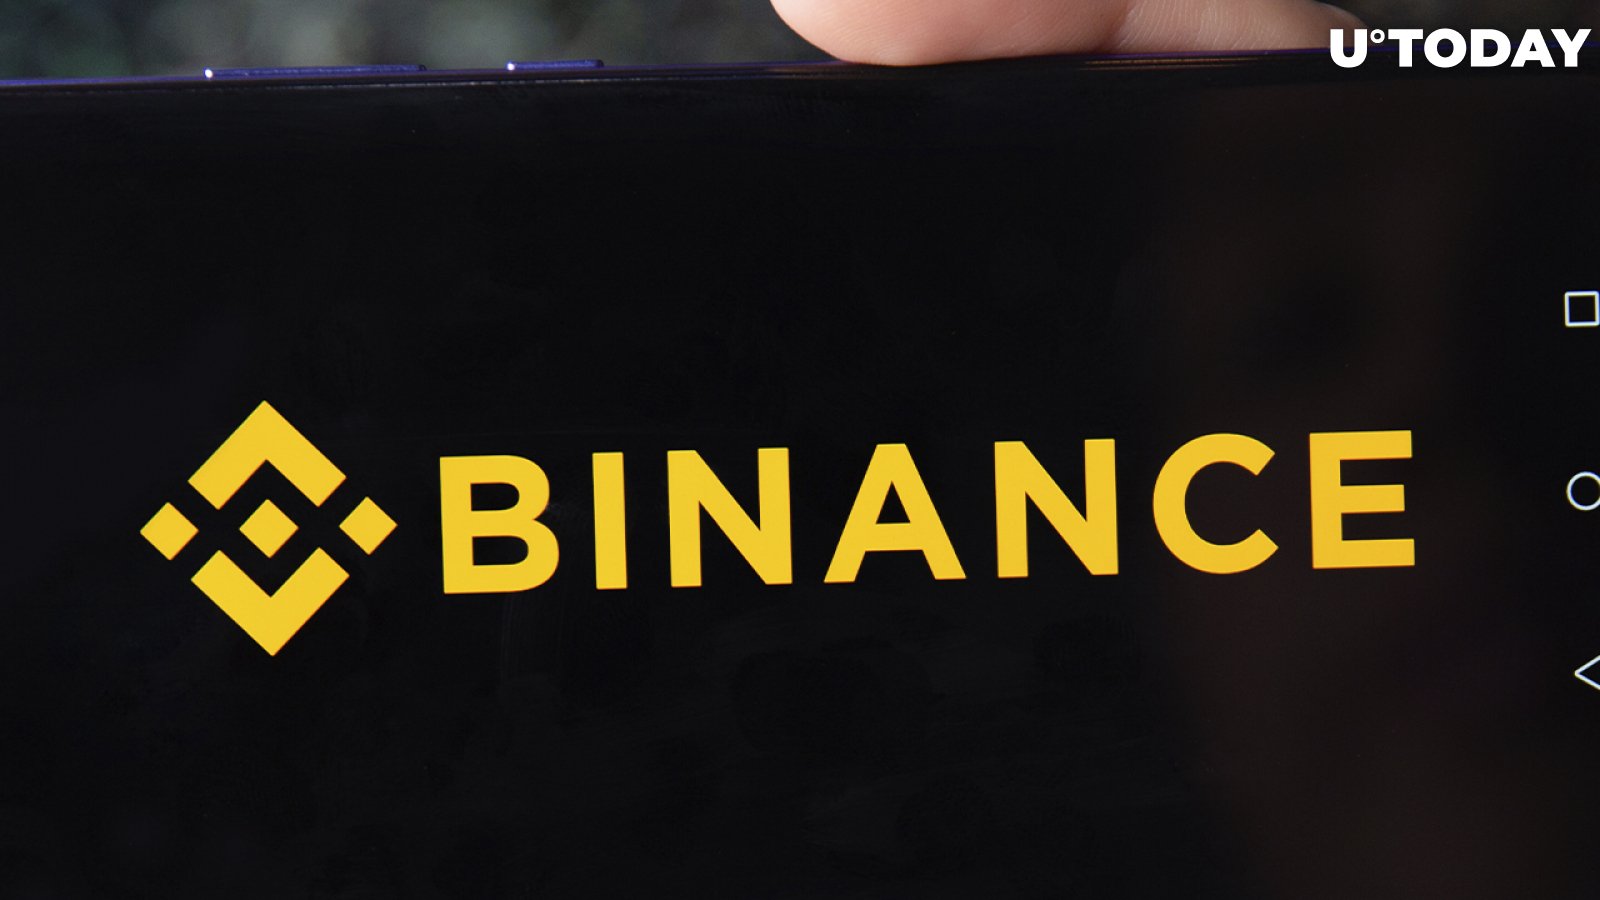 Binance Announces Release of Feature That Supports and Converts Almost All Ethereum Tokens